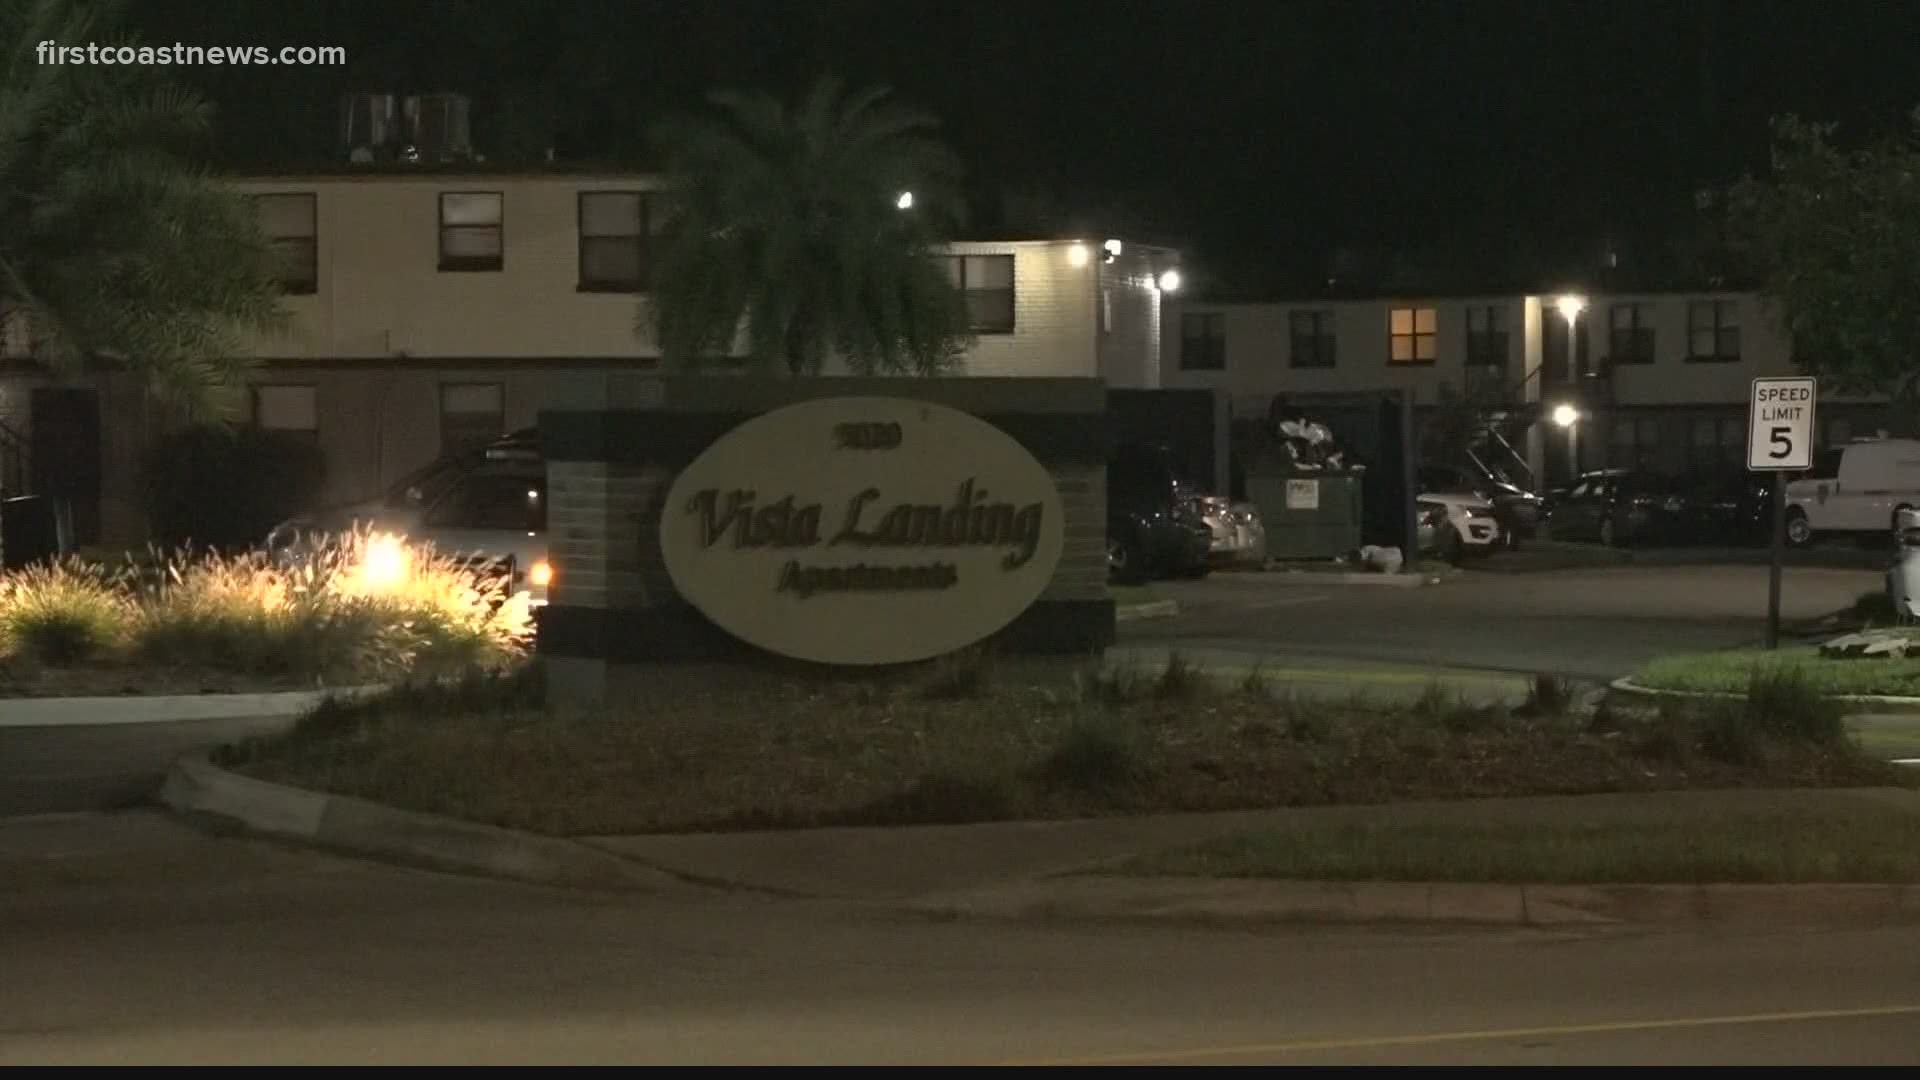 Police were called to the Vista Landing apartments on Cleveland Road around 10:30 p.m. Monday. The victim was found dead behind the apartments.